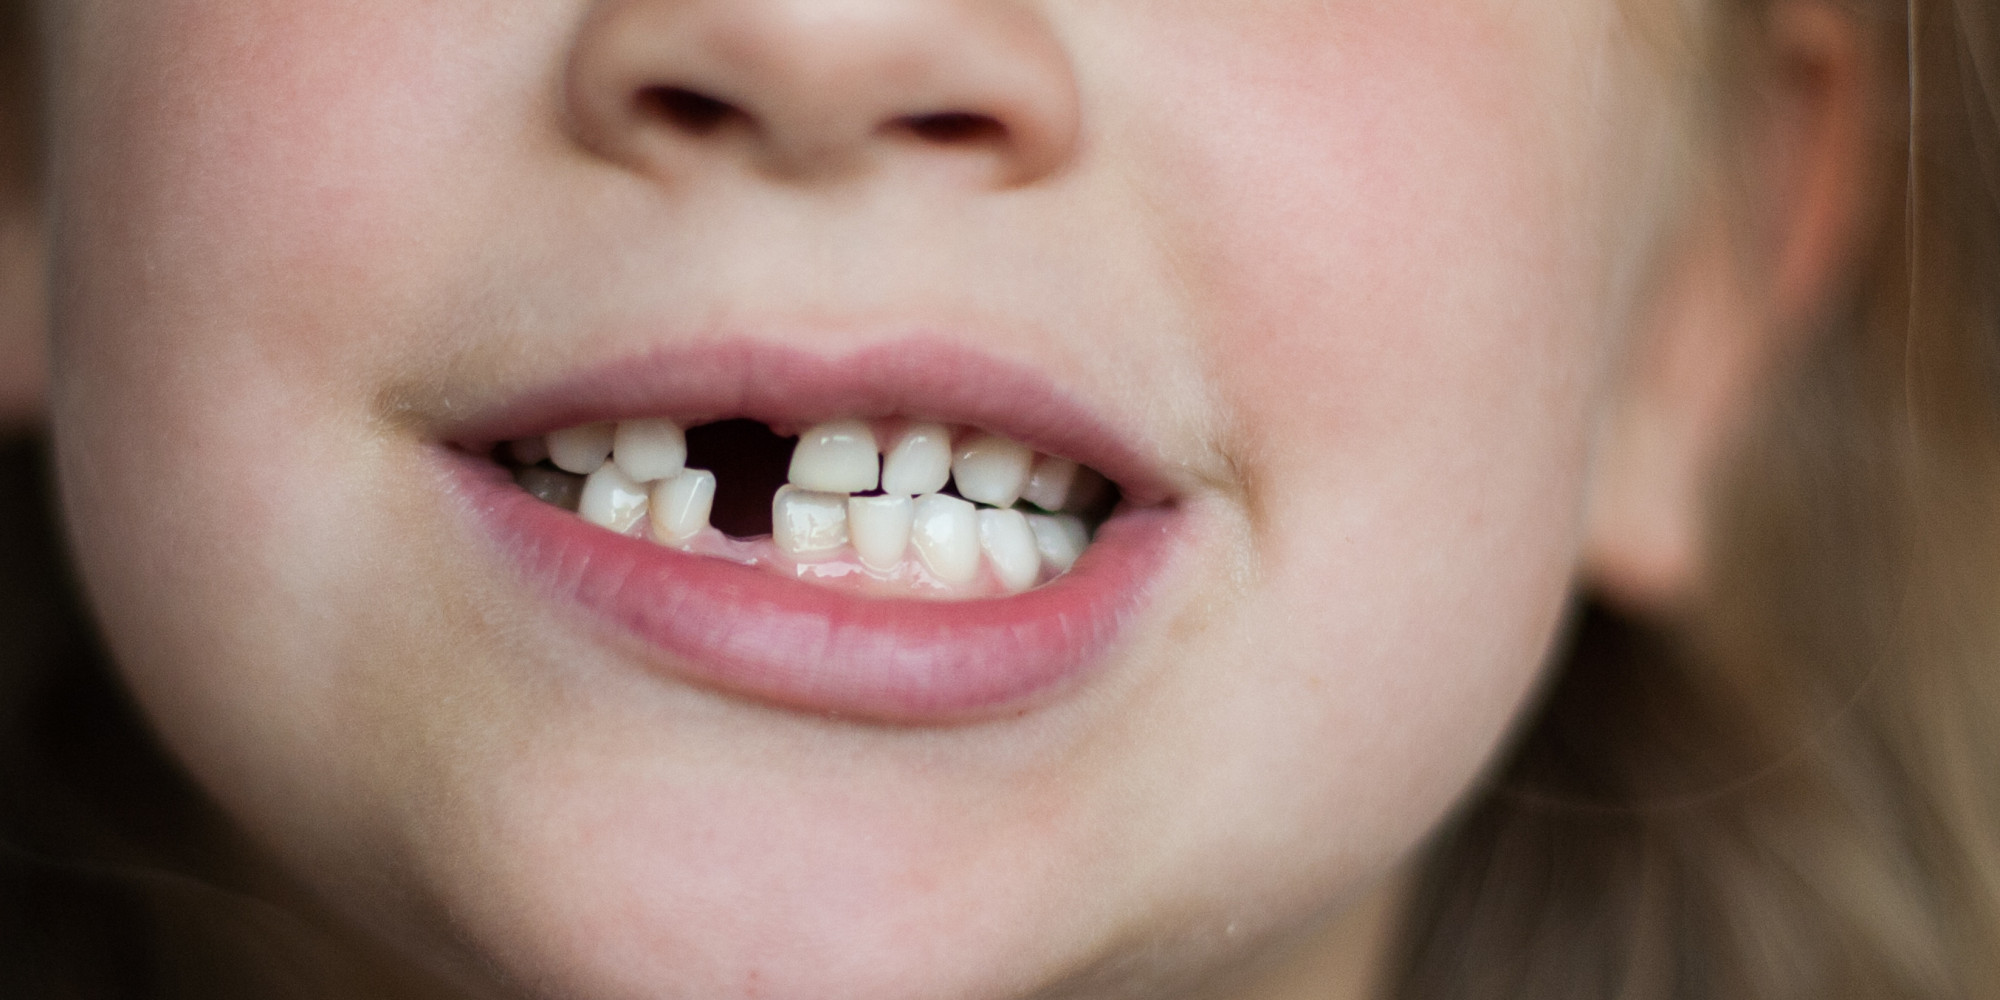 Is Your Child a Mouth-Breather? There's New Help at the Dentist ...